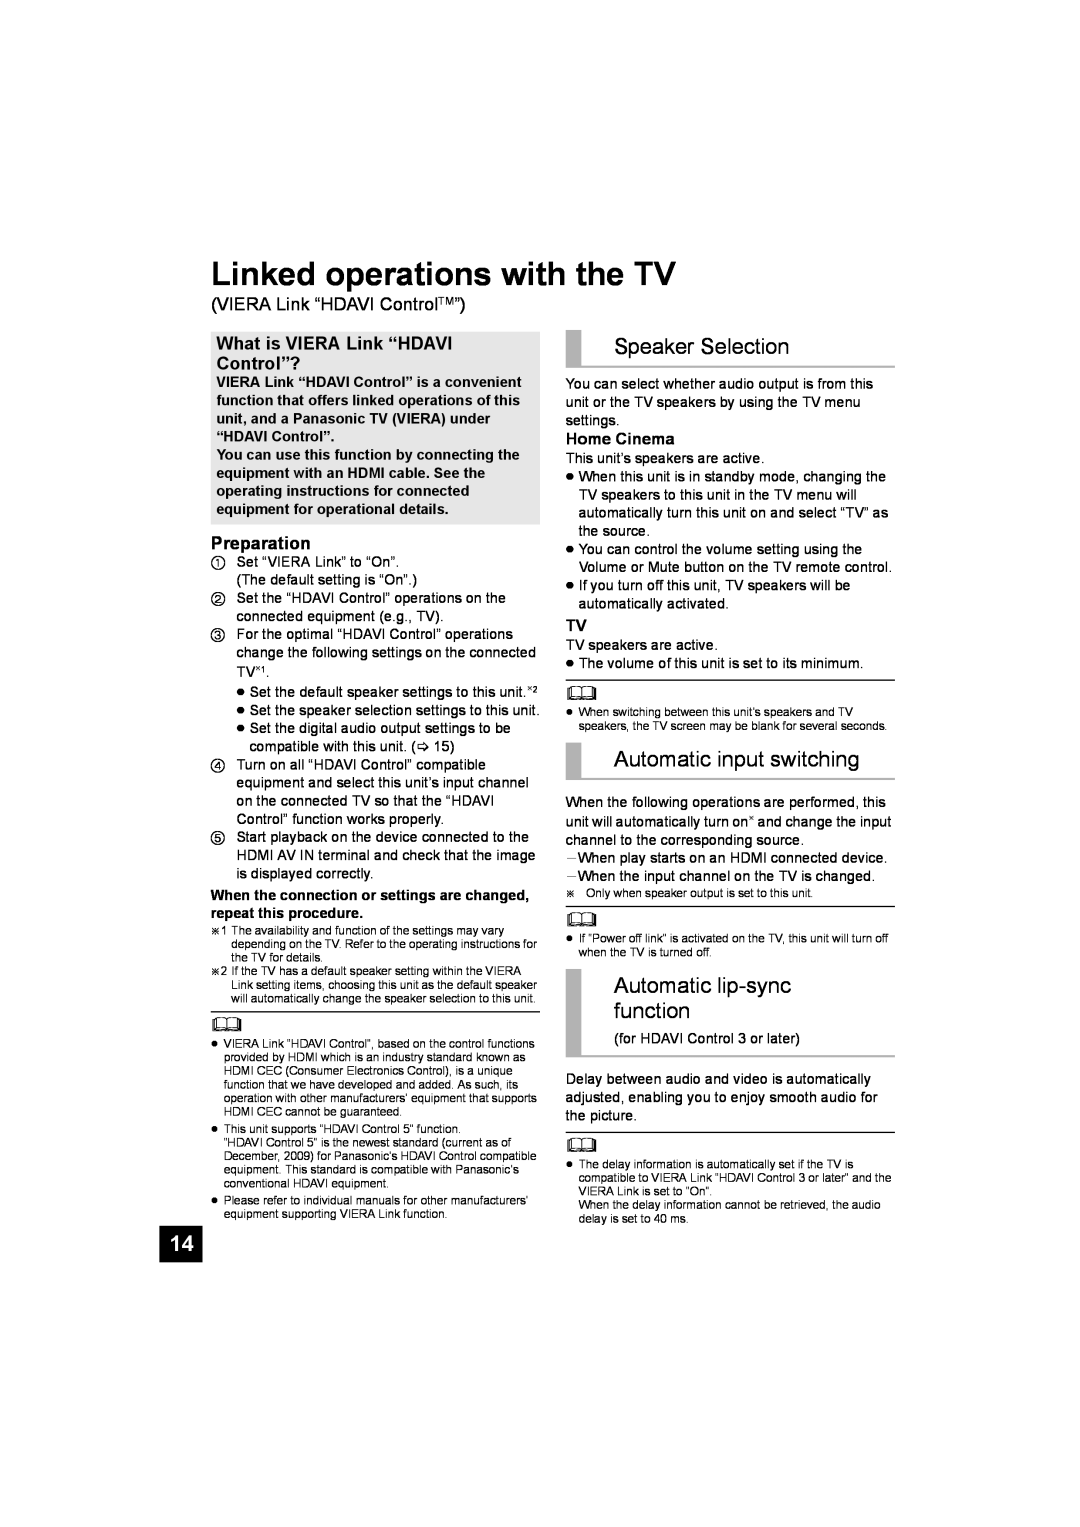 Panasonic SC-HTB10 Linked operations with the TV, Speaker Selection, Automatic input switching, Automatic lip-syncfunction 